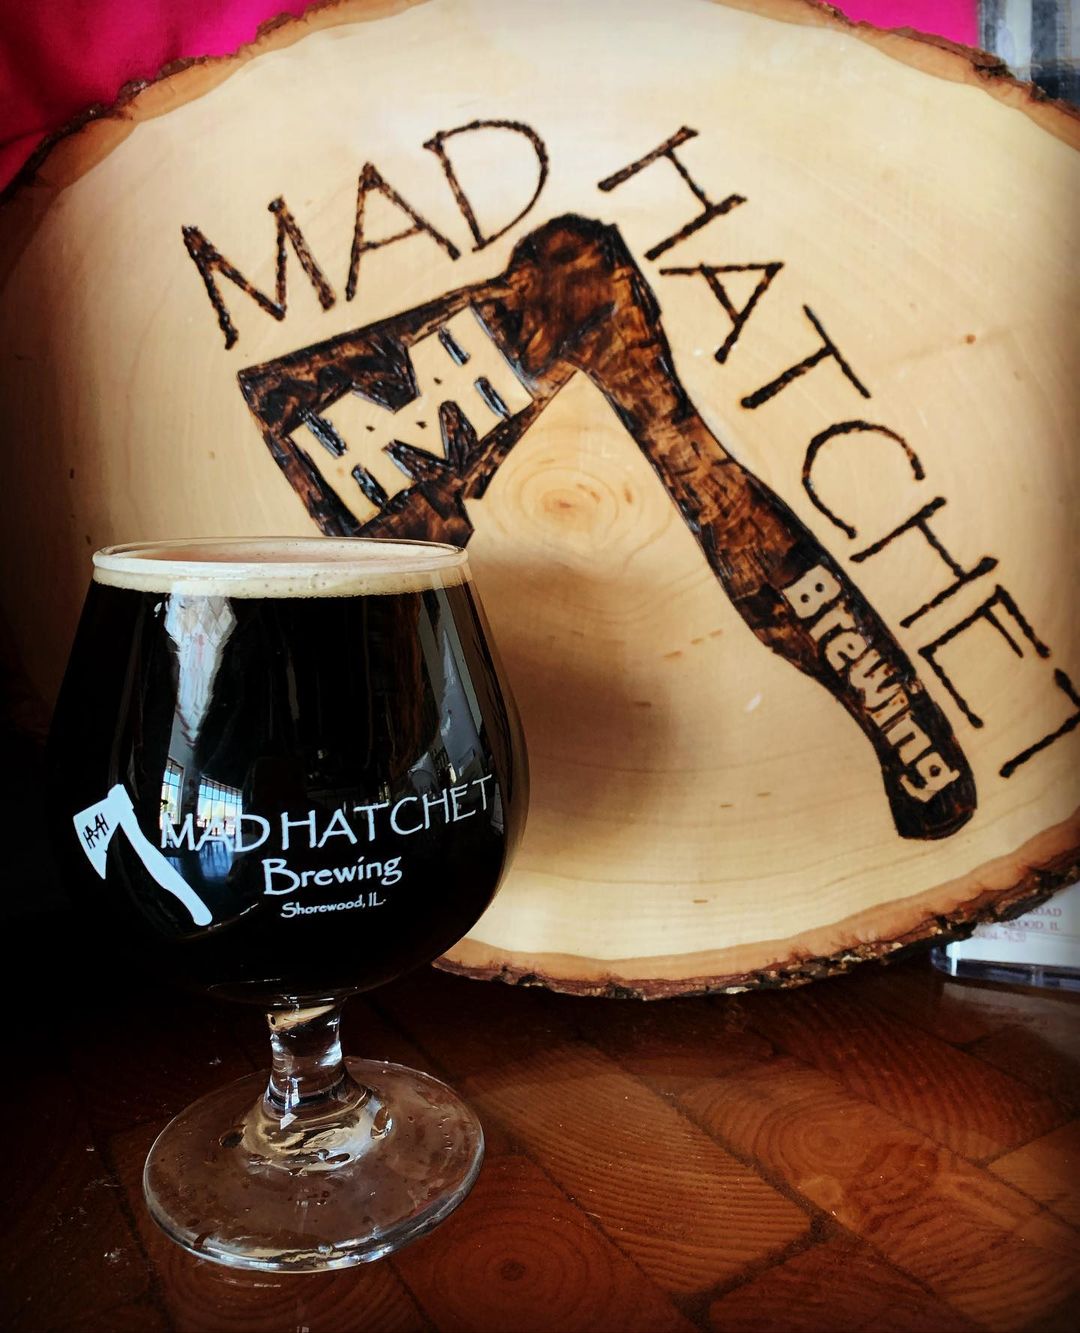 Glass of Mad Hatchet's Cinnister Stout